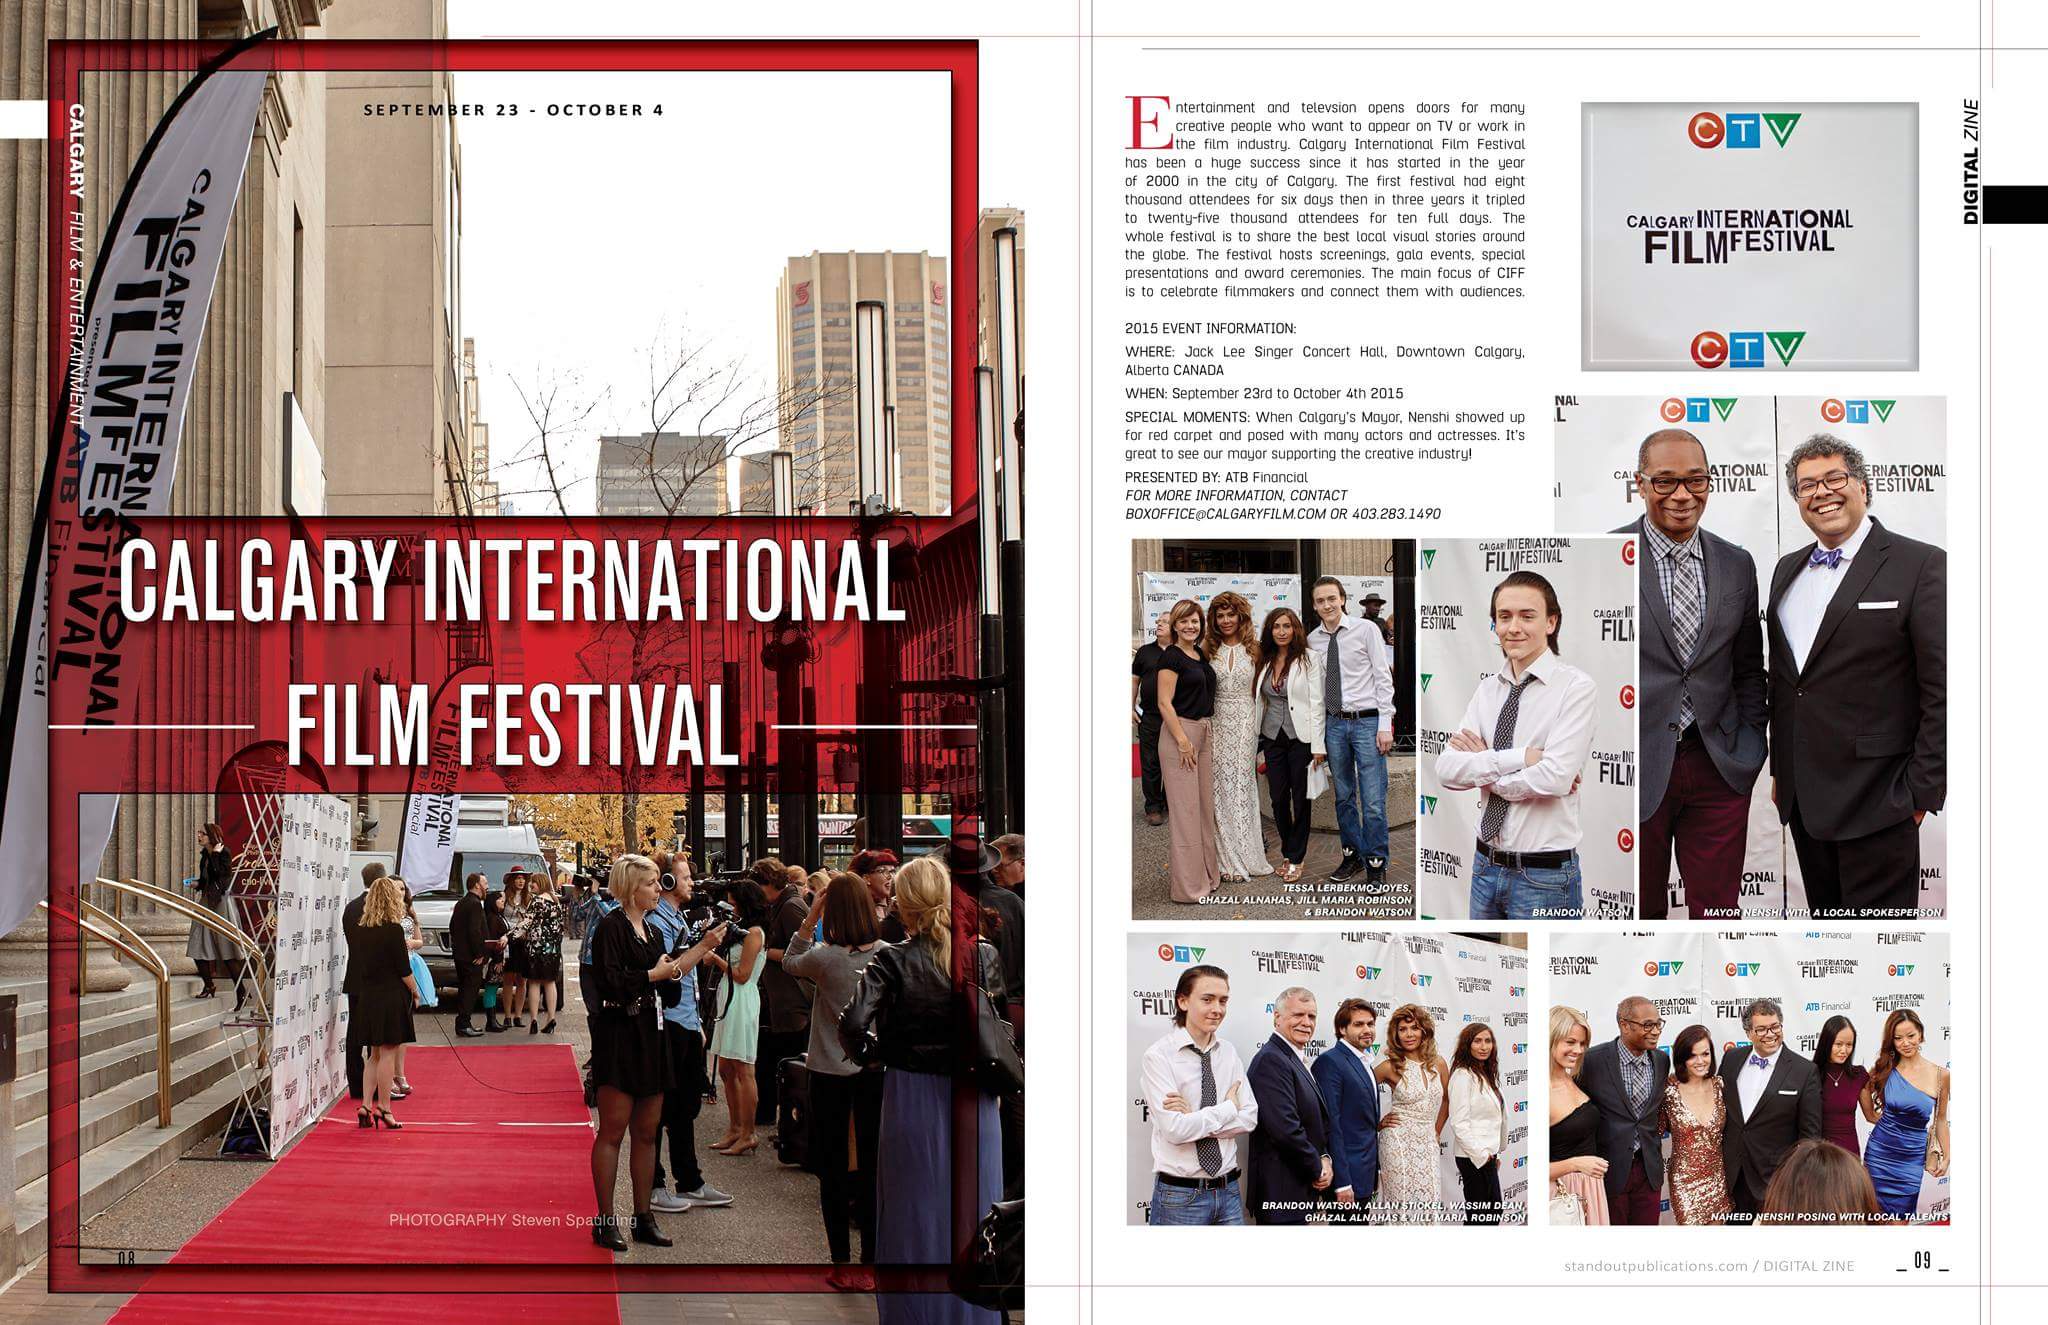 In Canadian Standout Publications Magazine for attending Calgary International Film Festival 2015.